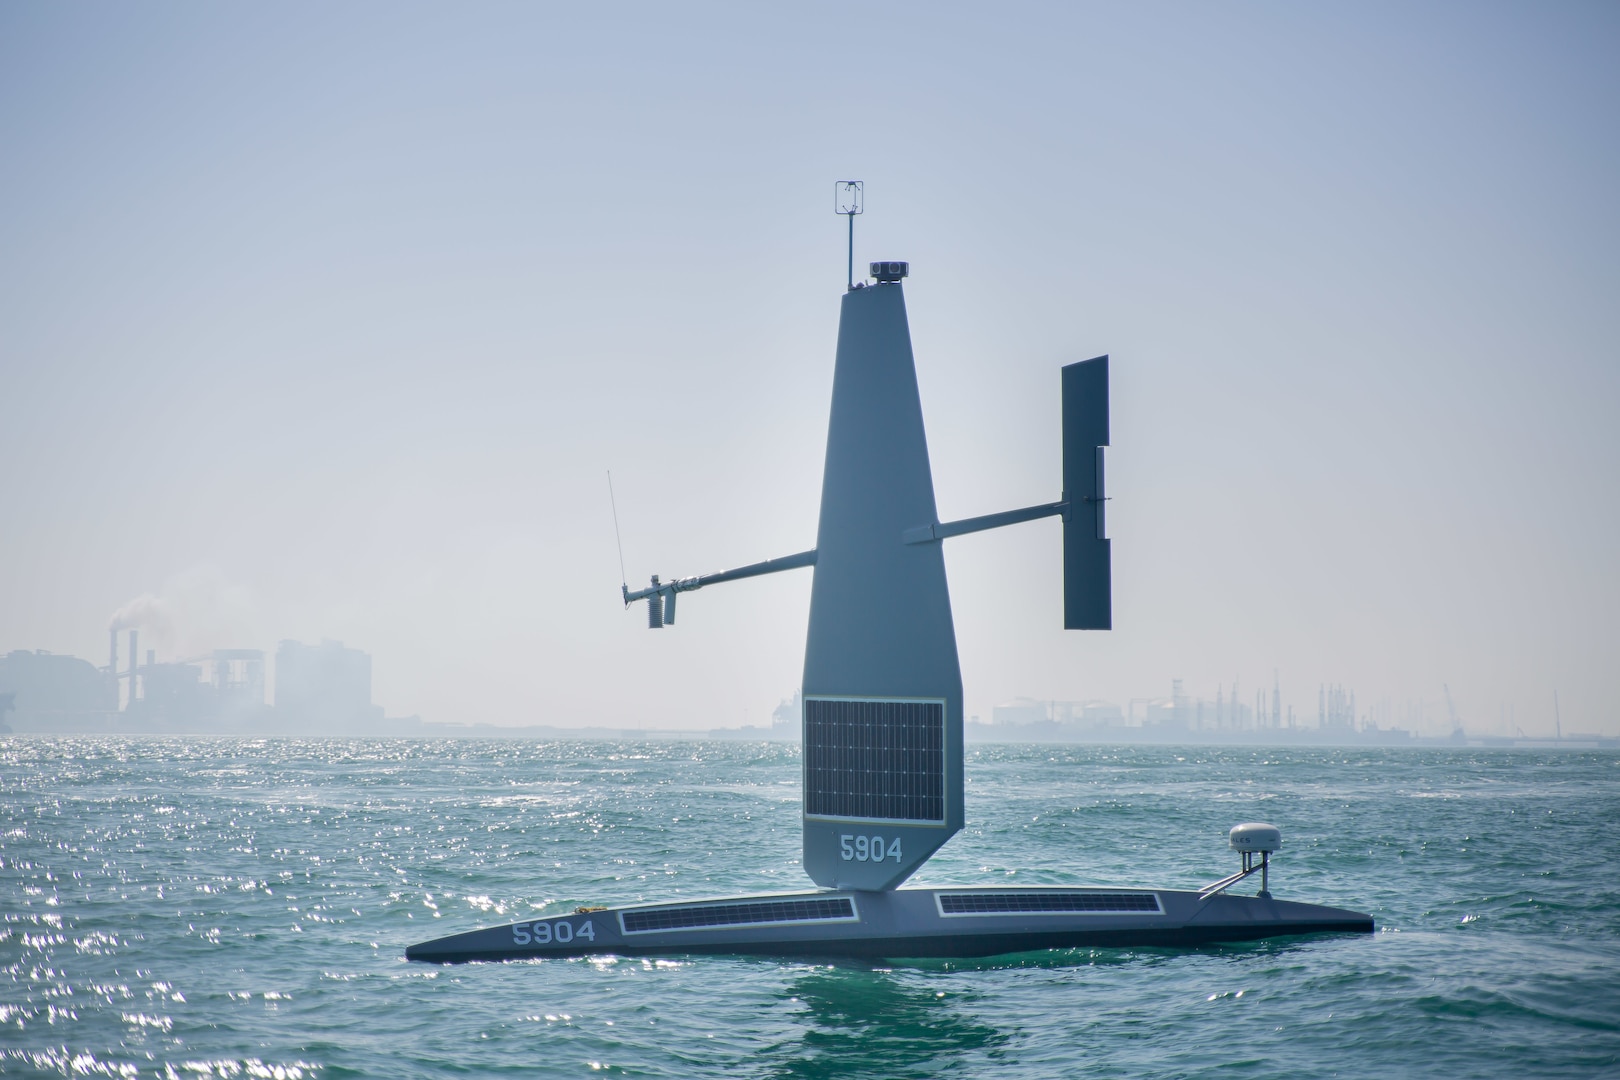 220127-A-RM286-2136 ARABIAN GULF (Jan. 27, 2022) A Saildrone Explorer unmanned surface vessel (USV) sails in the Arabian Gulf off Bahrain’s coast, Jan. 27. U.S. Naval Forces Central Command began operationally testing the USV as part of an initiative to integrate new unmanned systems and artificial intelligence into U.S. 5th Fleet operations.